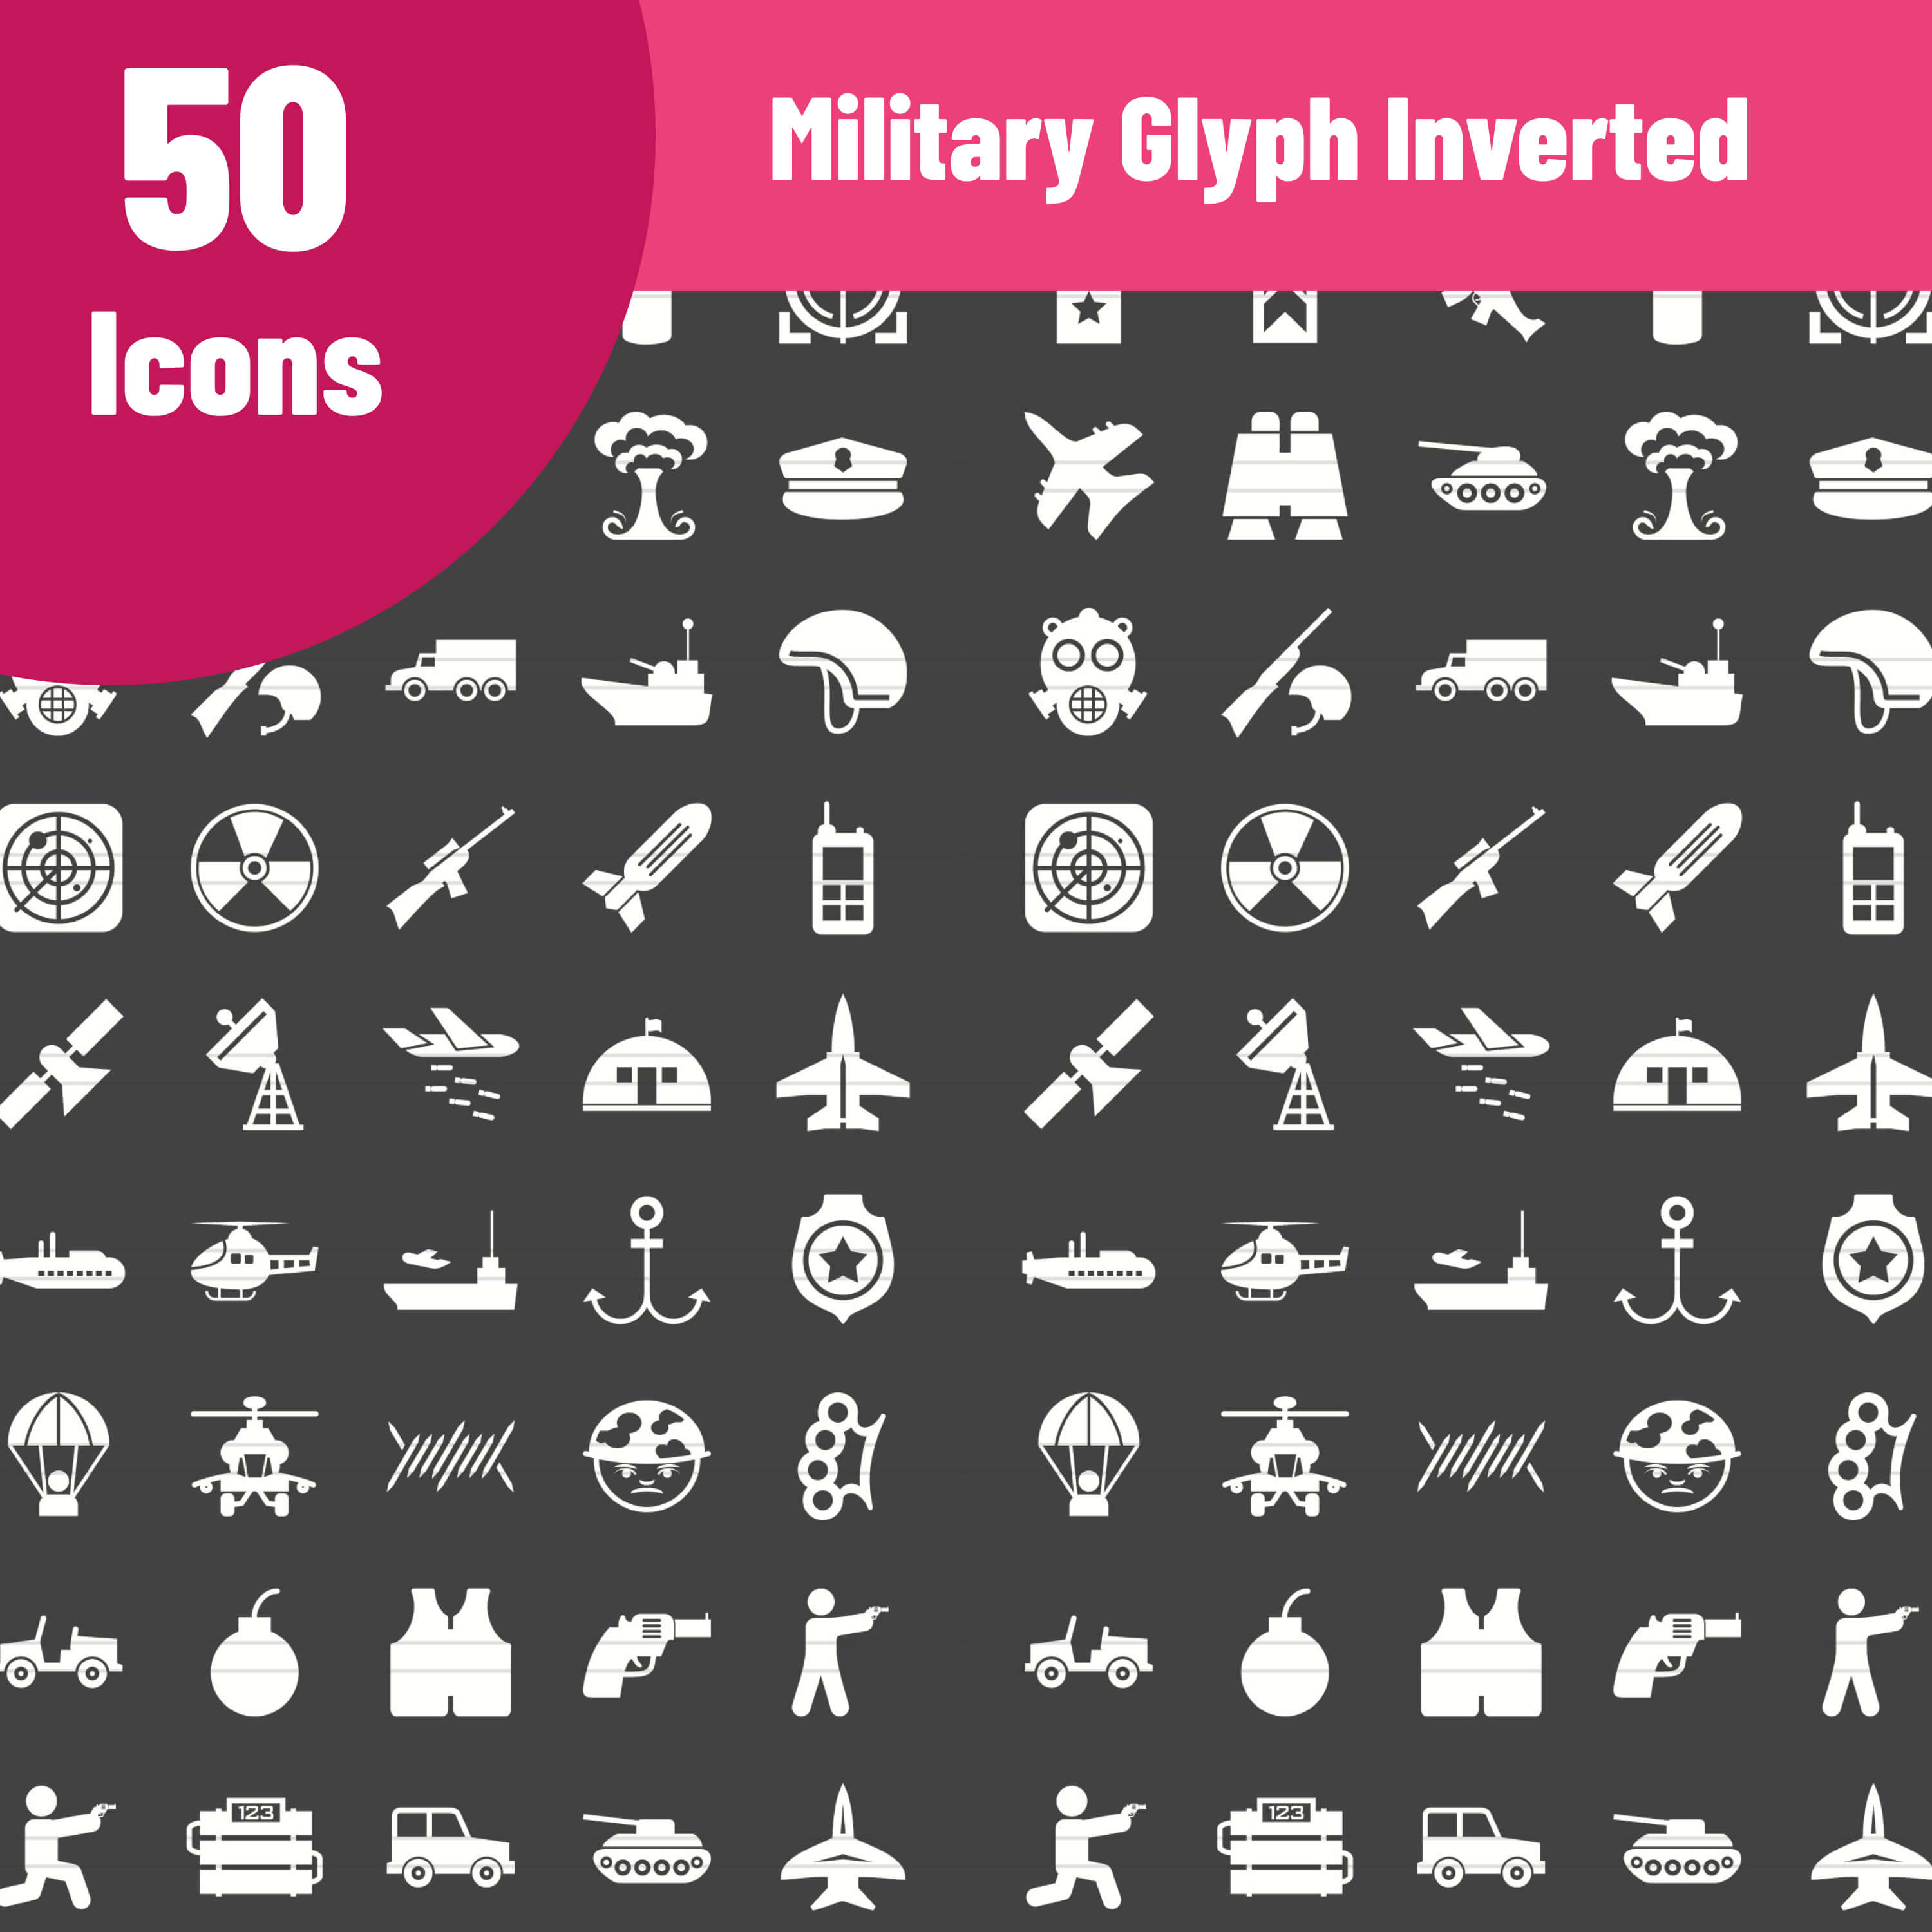 50 Military Glyph Inverted Icons.